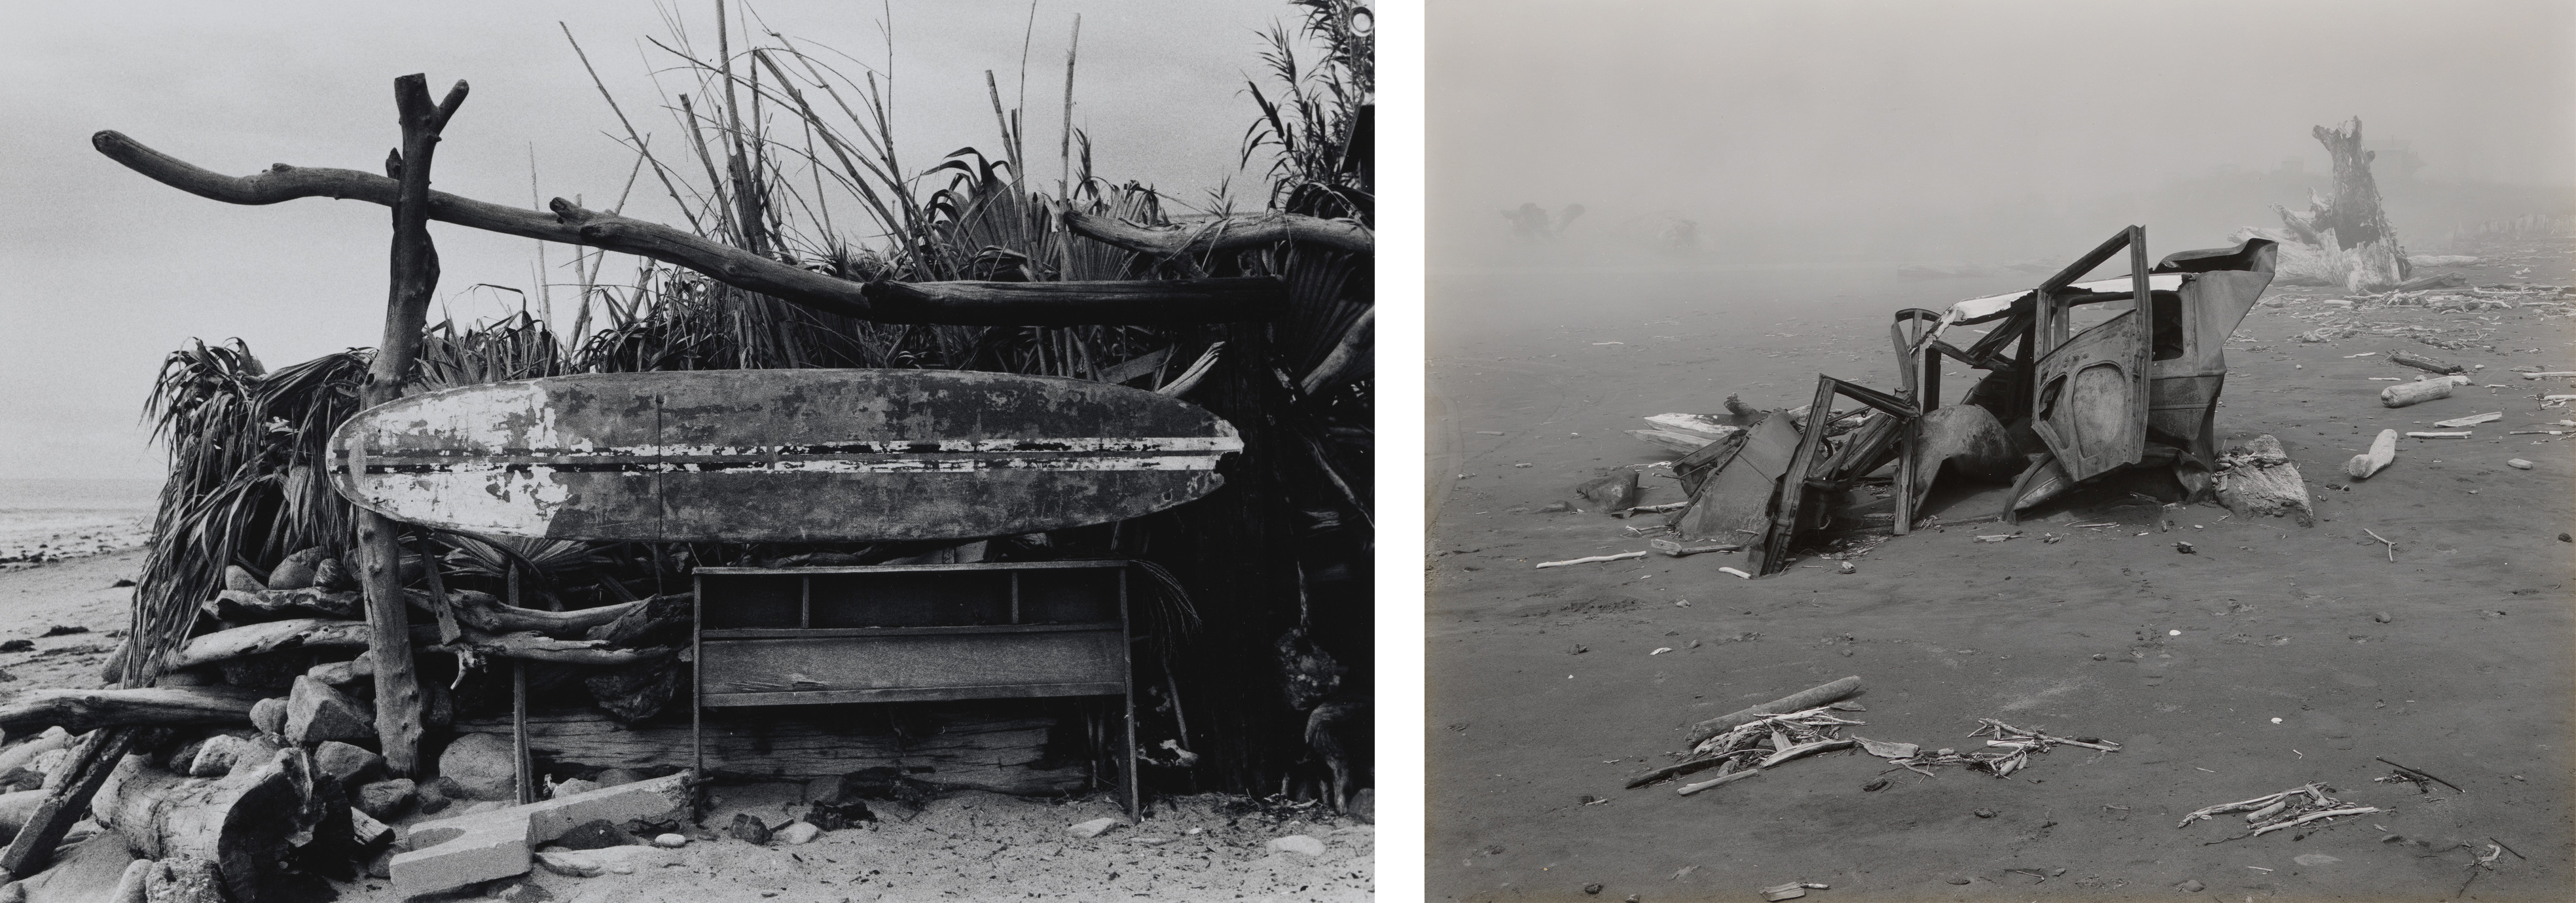 Left: Anthony Friedkin, Old Surfboard, Topanga Beach, California, 1977, Los Angeles County Museum of Art, Ralph M. Parsons Fund, © Anthony Friedkin, digital image © Museum Associates/LACMA; Right: Edward Weston, Wrecked Car, Crescent Beach, 1939, Los Angeles County Museum of Art, anonymous gift, © Center for Creative Photography, Arizona Board of Regents, digital image © Museum Associates/LACMA